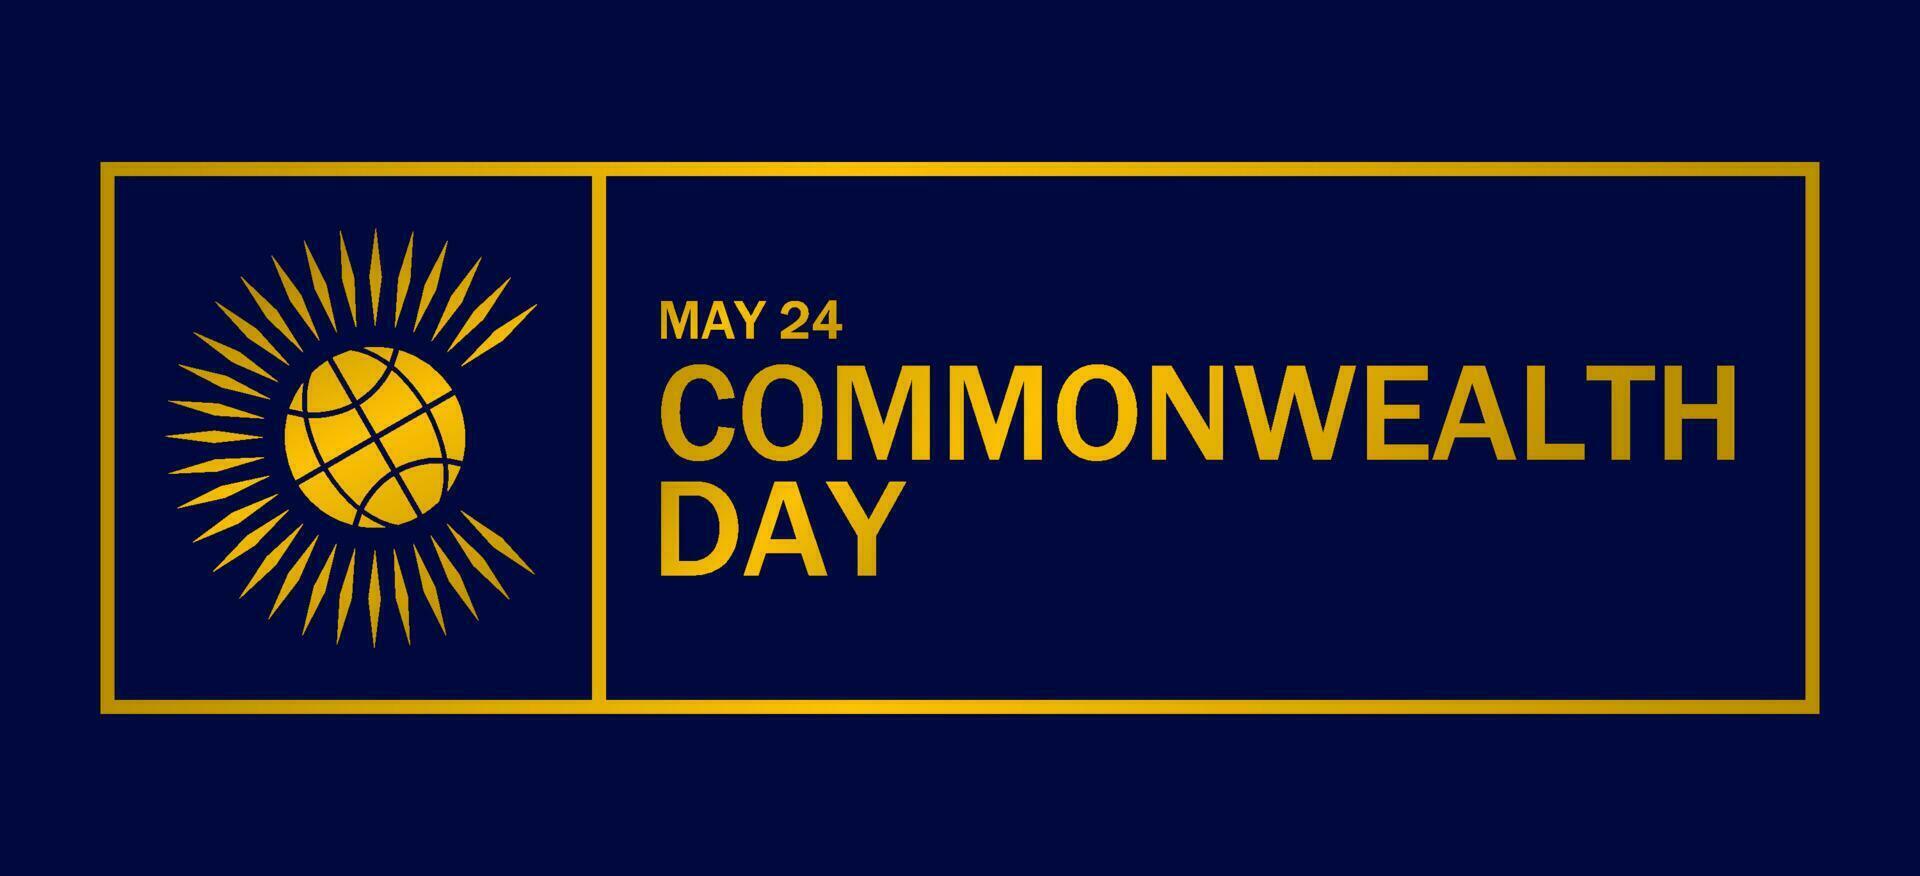 Commonwealth day vector illustration. Suitable for Poster, Banners, background and greeting card.